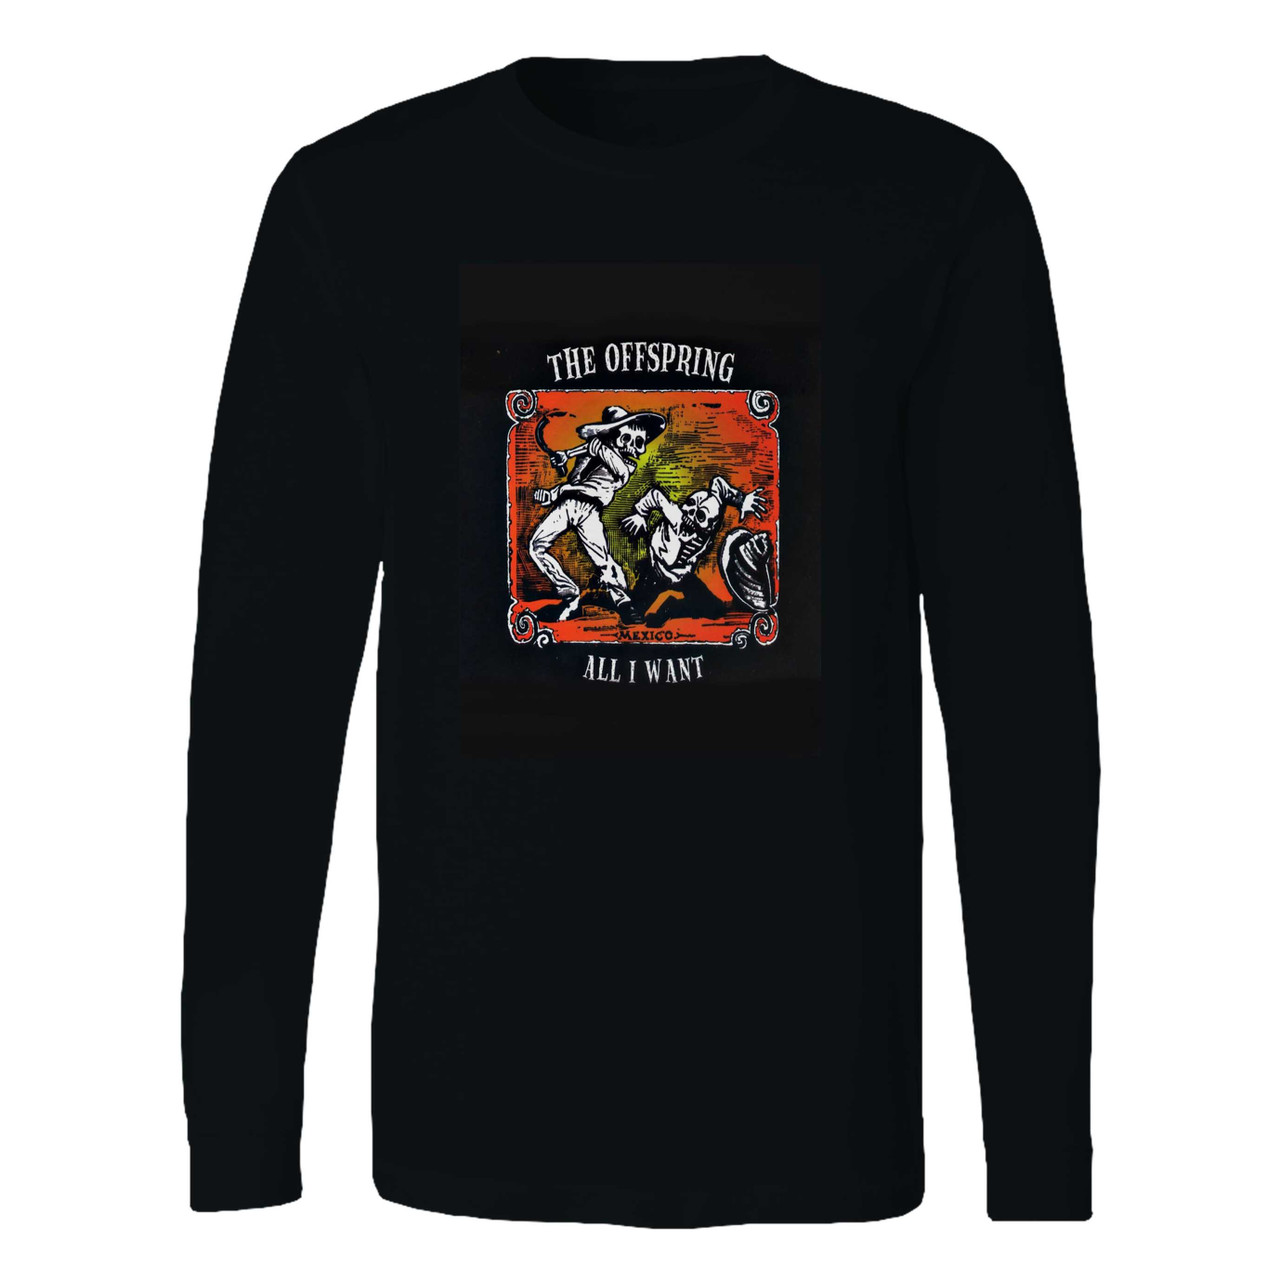 The Offspring All I Want Long Sleeve Shirt